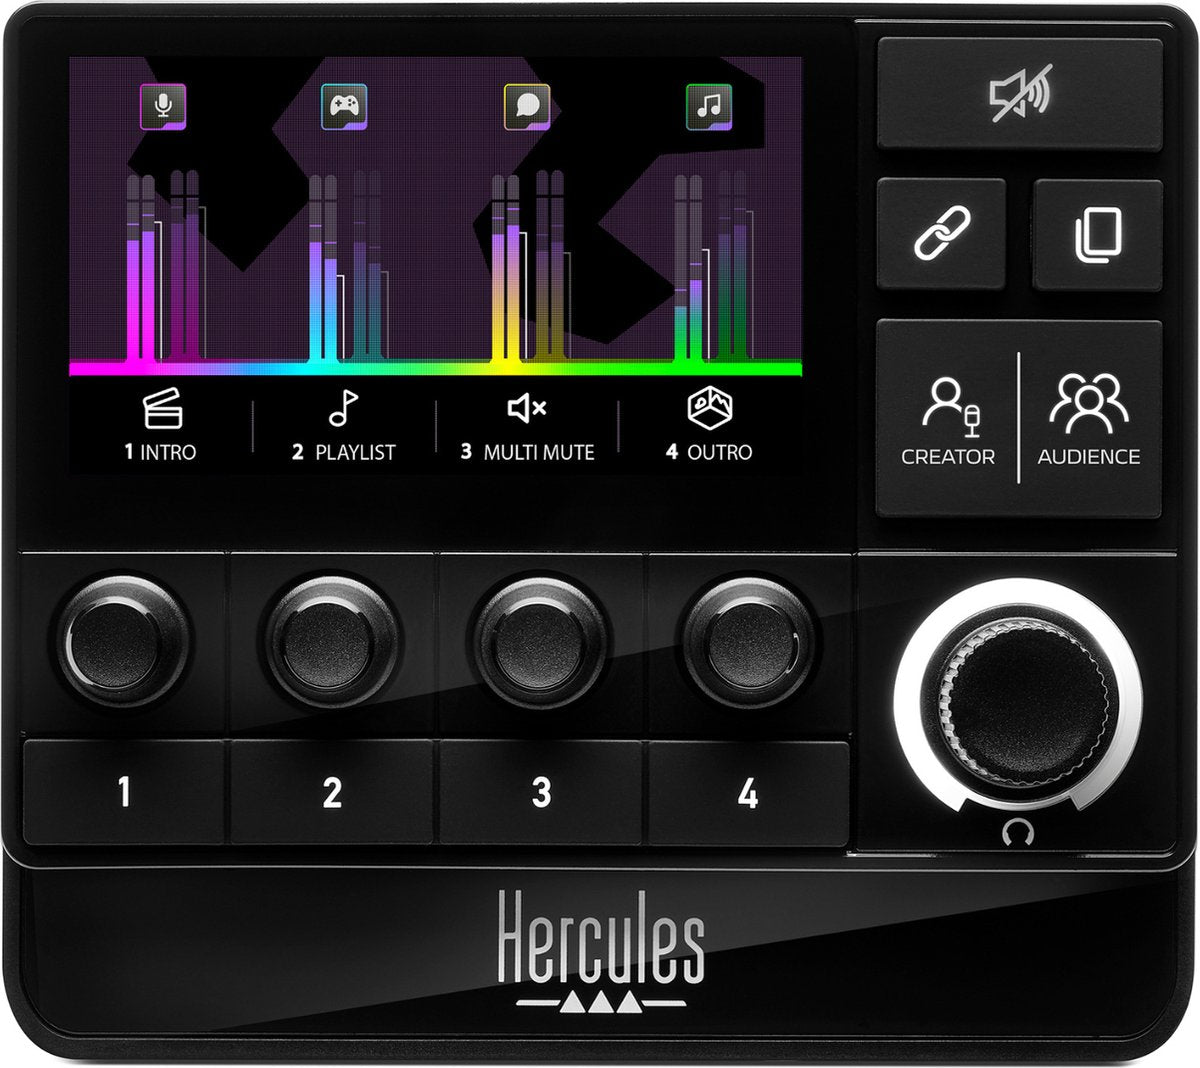 Hercules Stream 200 XLR, Professional audio controller for real-time management of creator/audience mixes, with Microphone preamplifier, LCD screen, High-resolution encoders, 4 action buttons